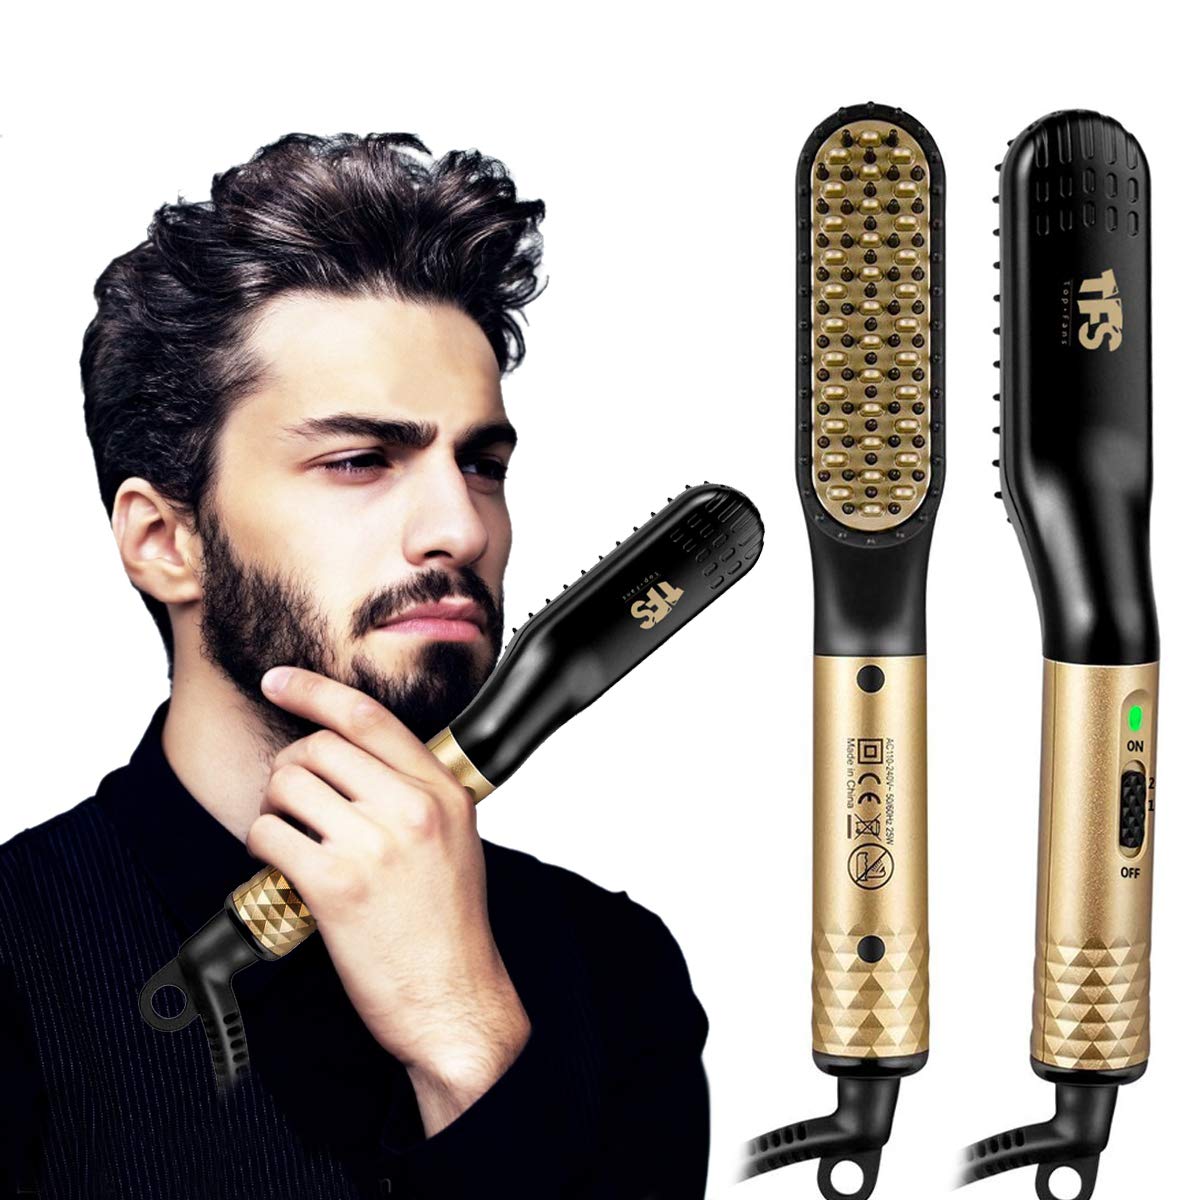 Book Cover TFS Heated Beard Straightener Brush for Men - 2 In 1 Beard & Hair Straightening Brush with Ceramic Teeth, Portable Electric Hot Comb Iron Men's Mustache Combs Brush Styler Tools for Buddy Home Travel